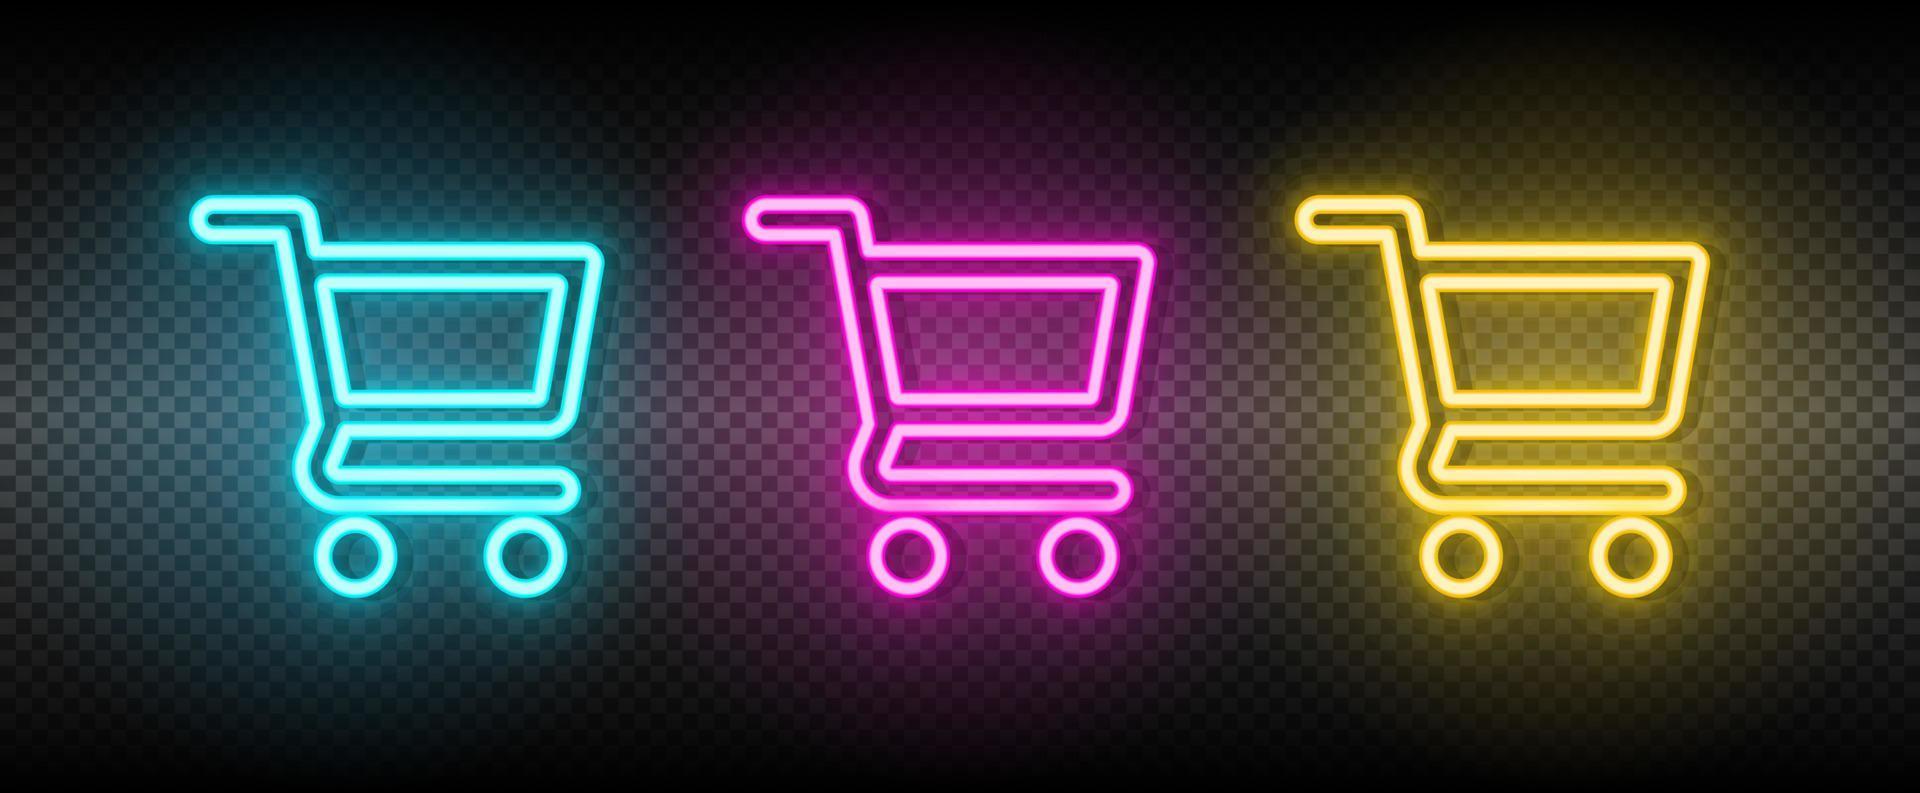 cart, shopping neon vector icon. Illustration neon blue, yellow, red icon set